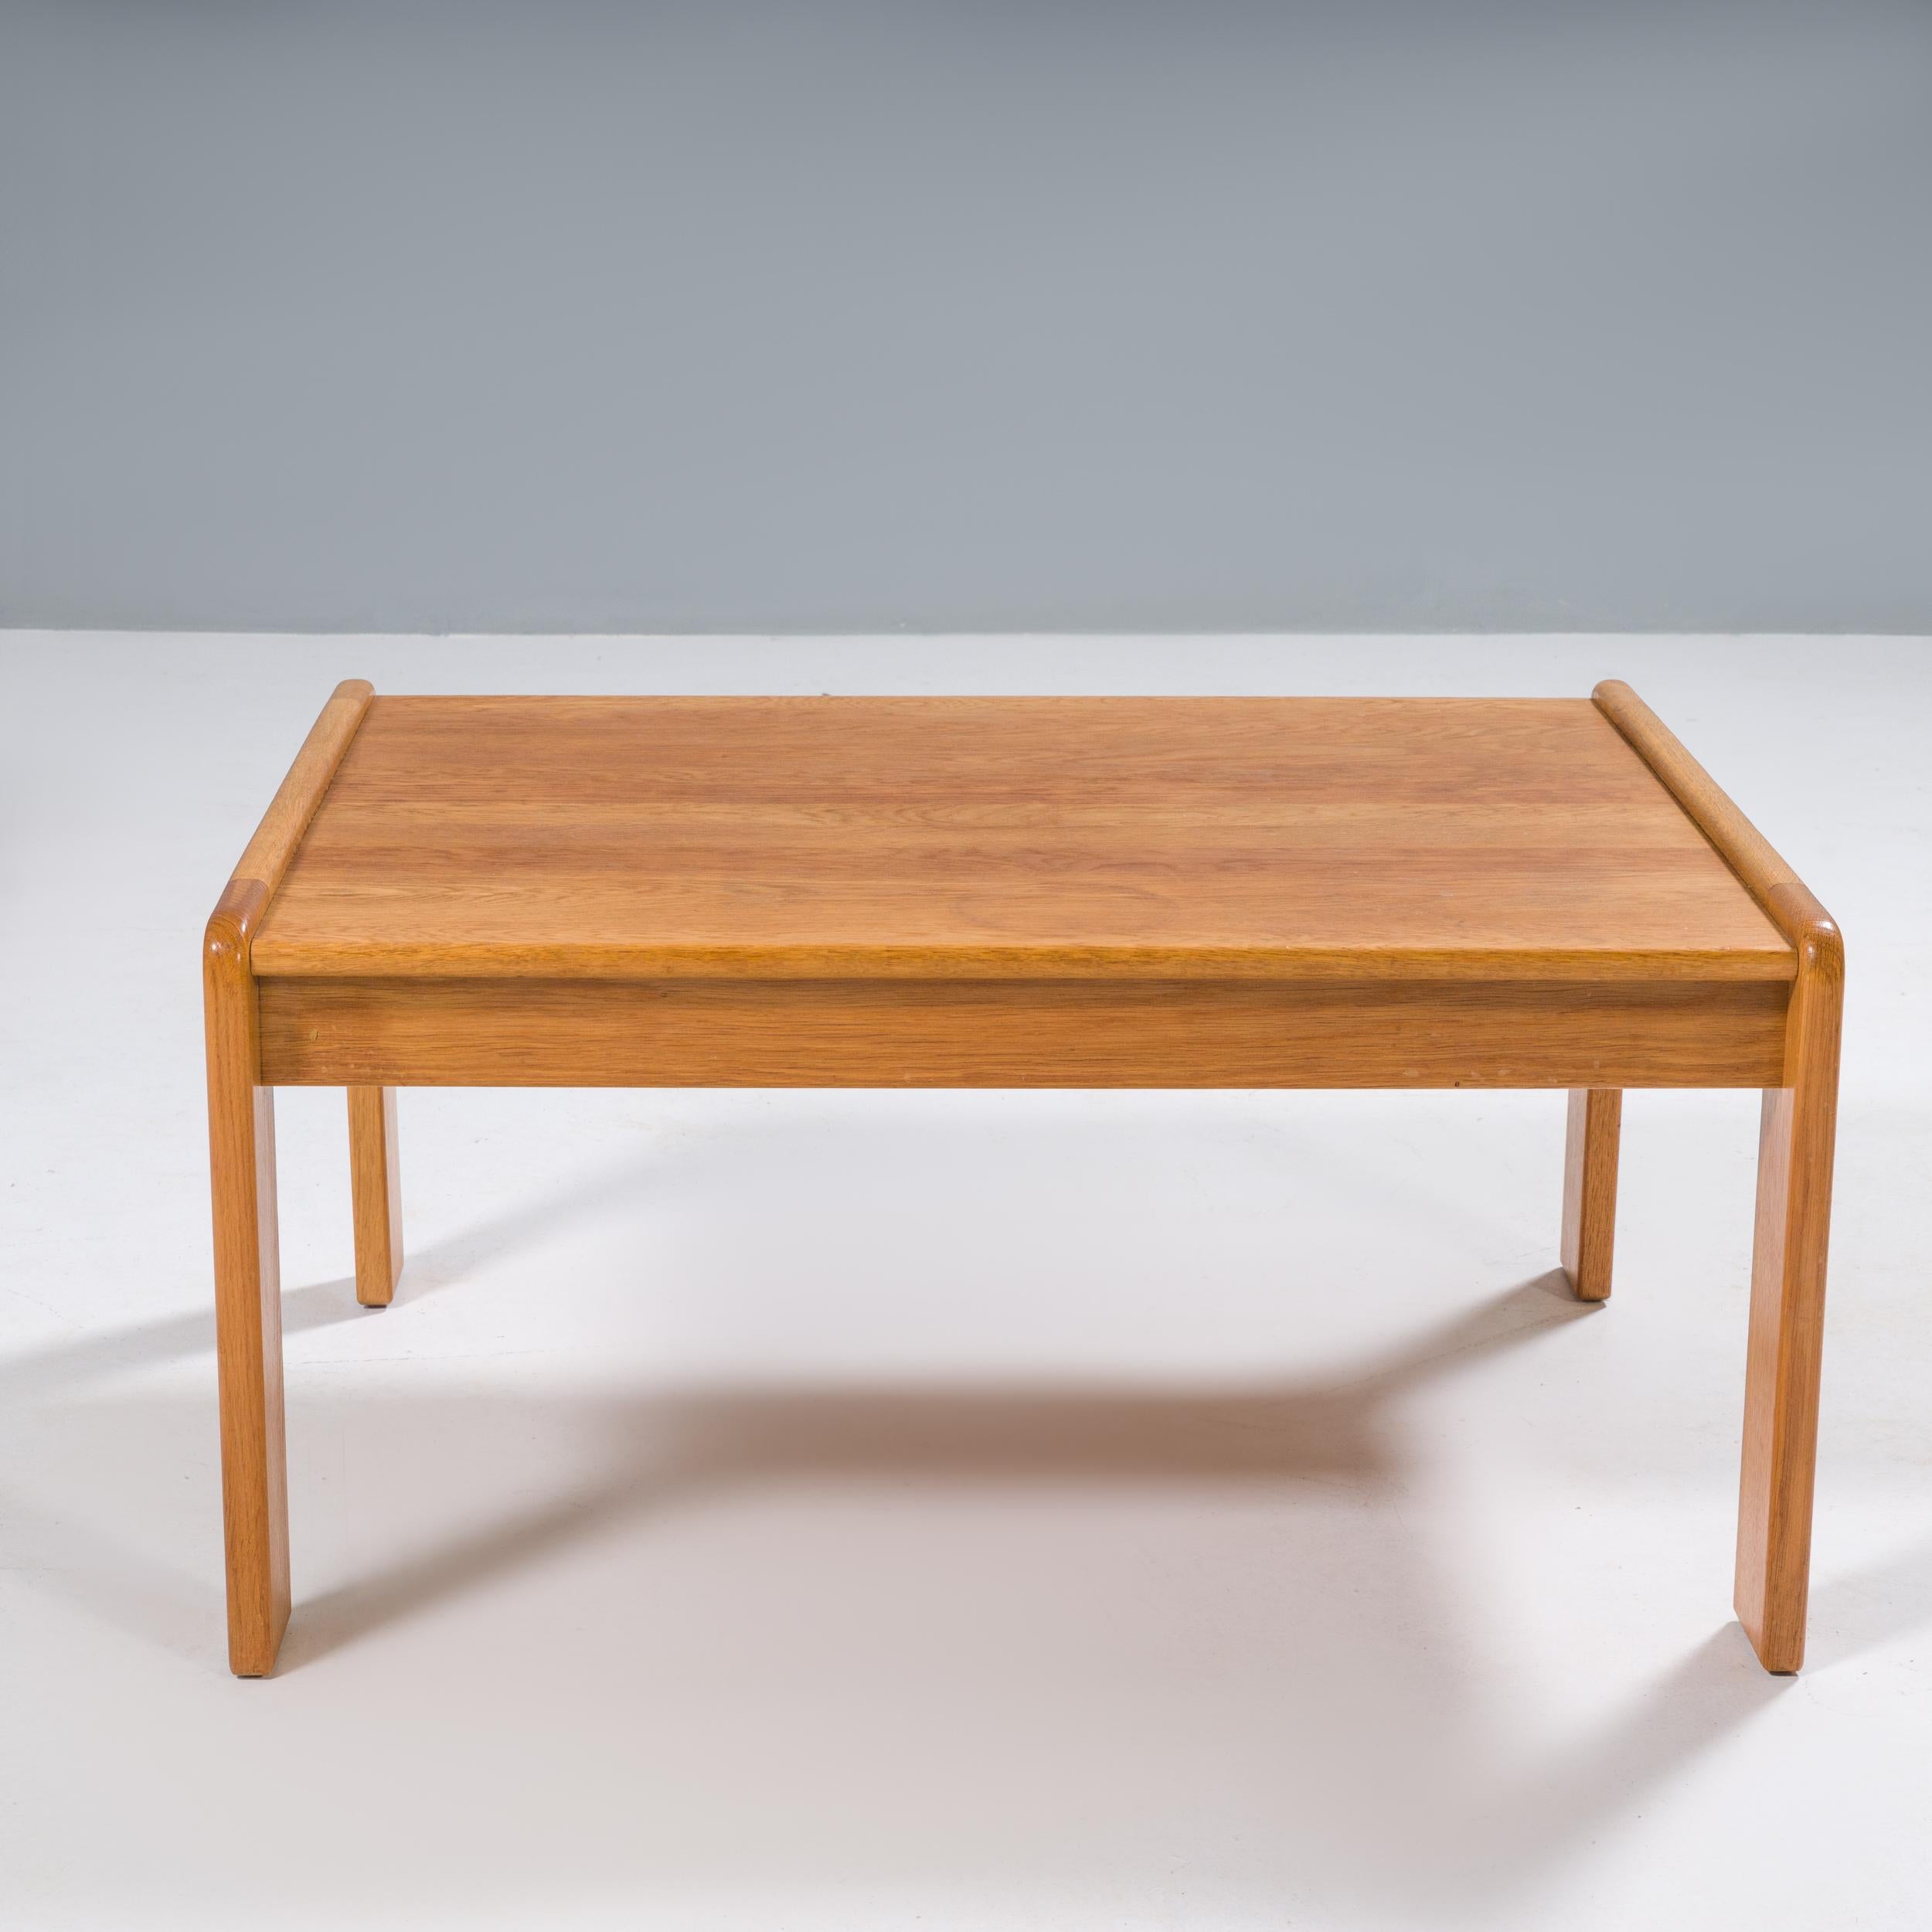 Yngve Ekström was one of the most important figures in the evolution of the Scandinavian Modernism movement and co-founder of the furniture design company Swedese.

This coffee table is constructed from pine wood and features sleek lines and curved